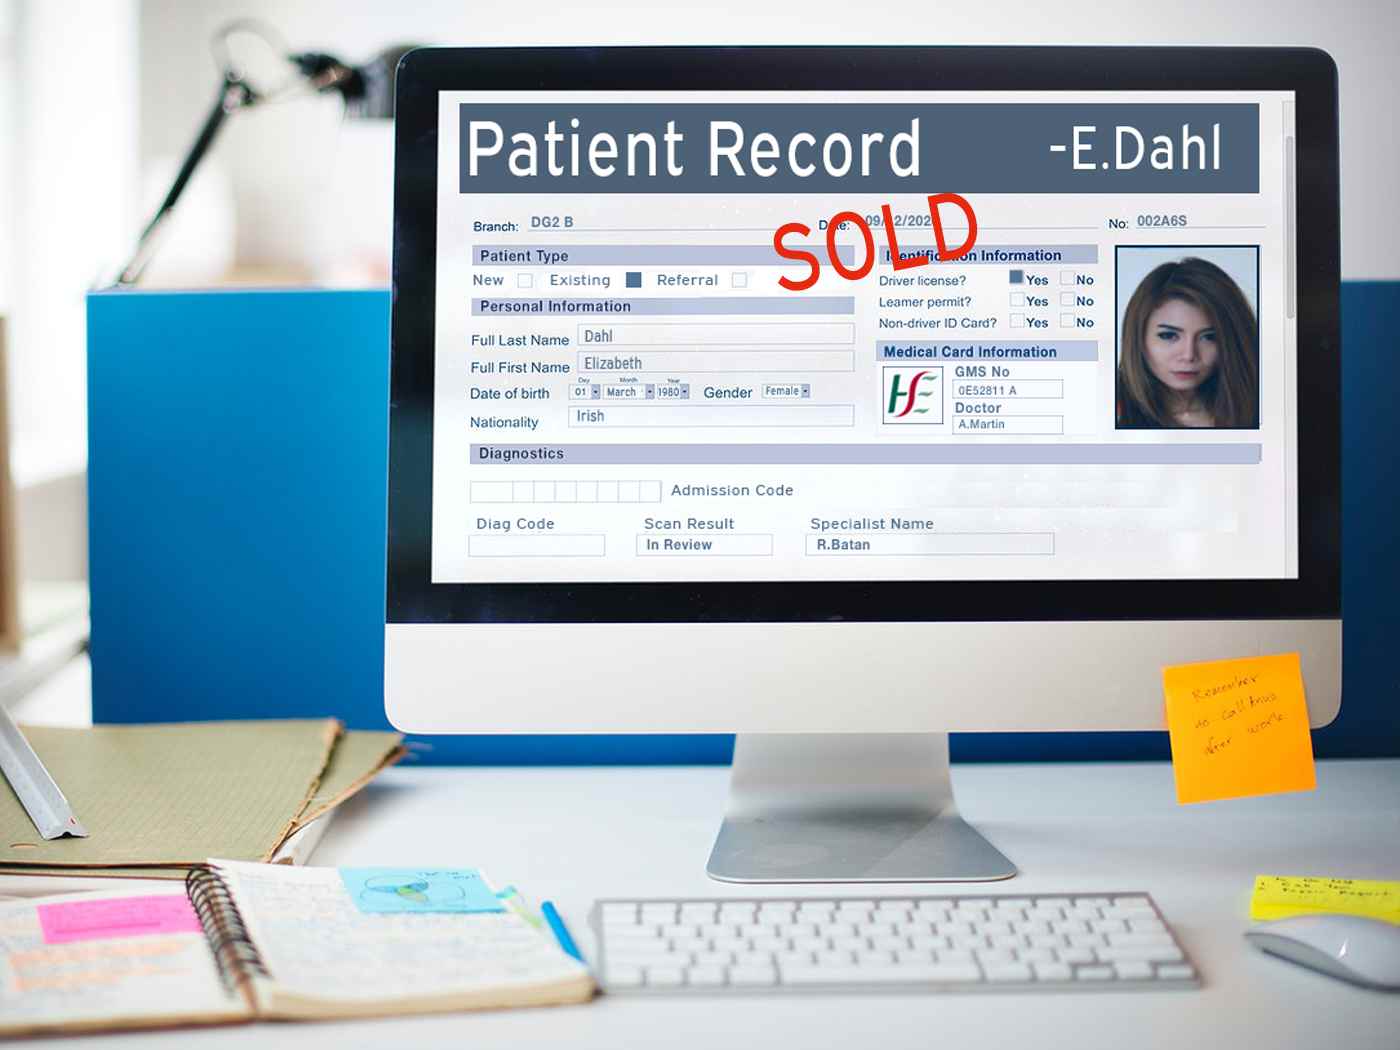 An image depicting a patient record used for an article by Paul Rogers on how data brokers are selling our data